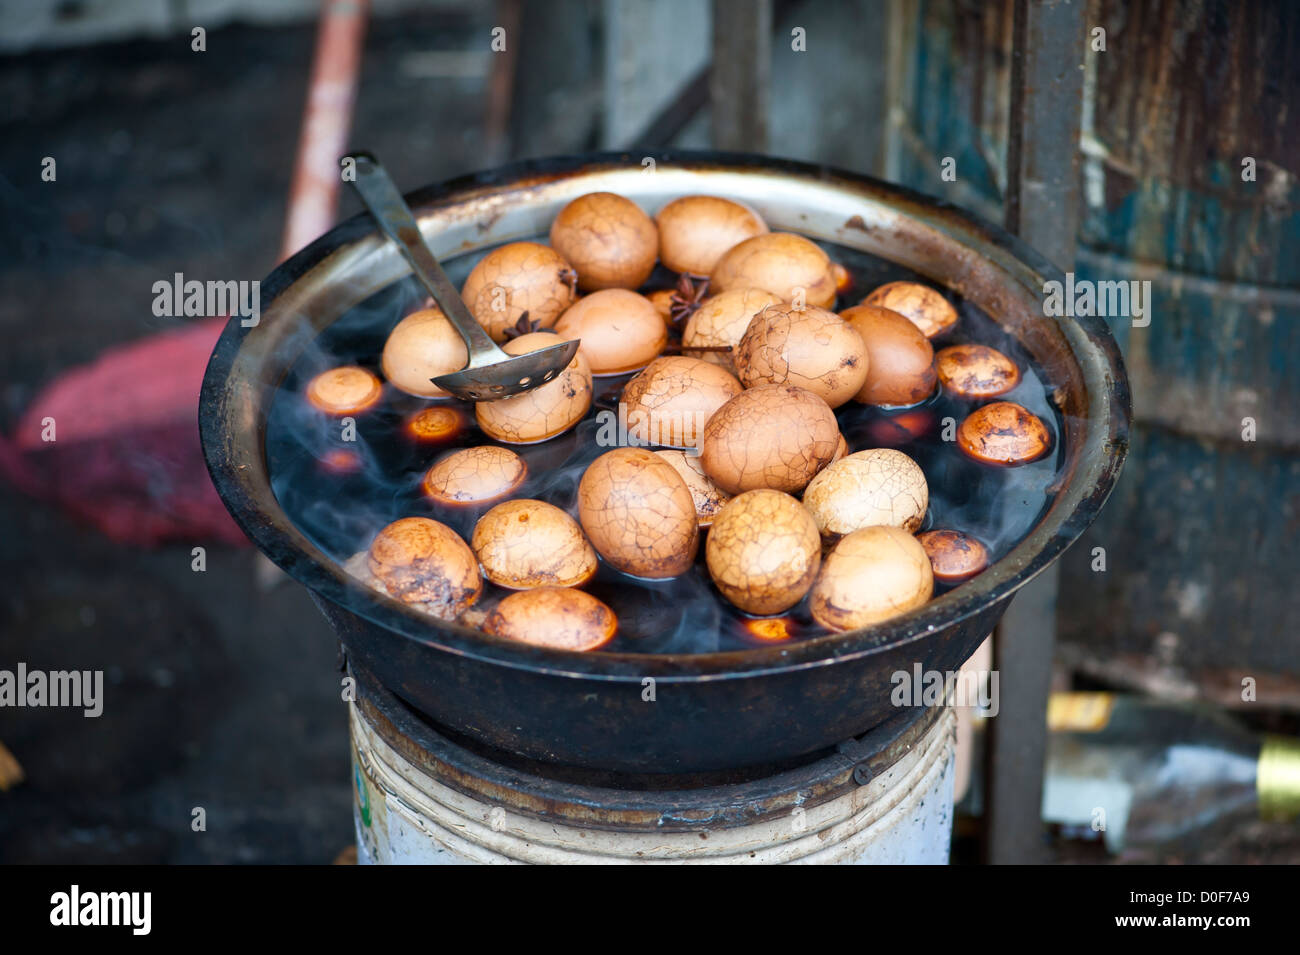 'One hundred year old' eggs, Pudong, China Stock Photo